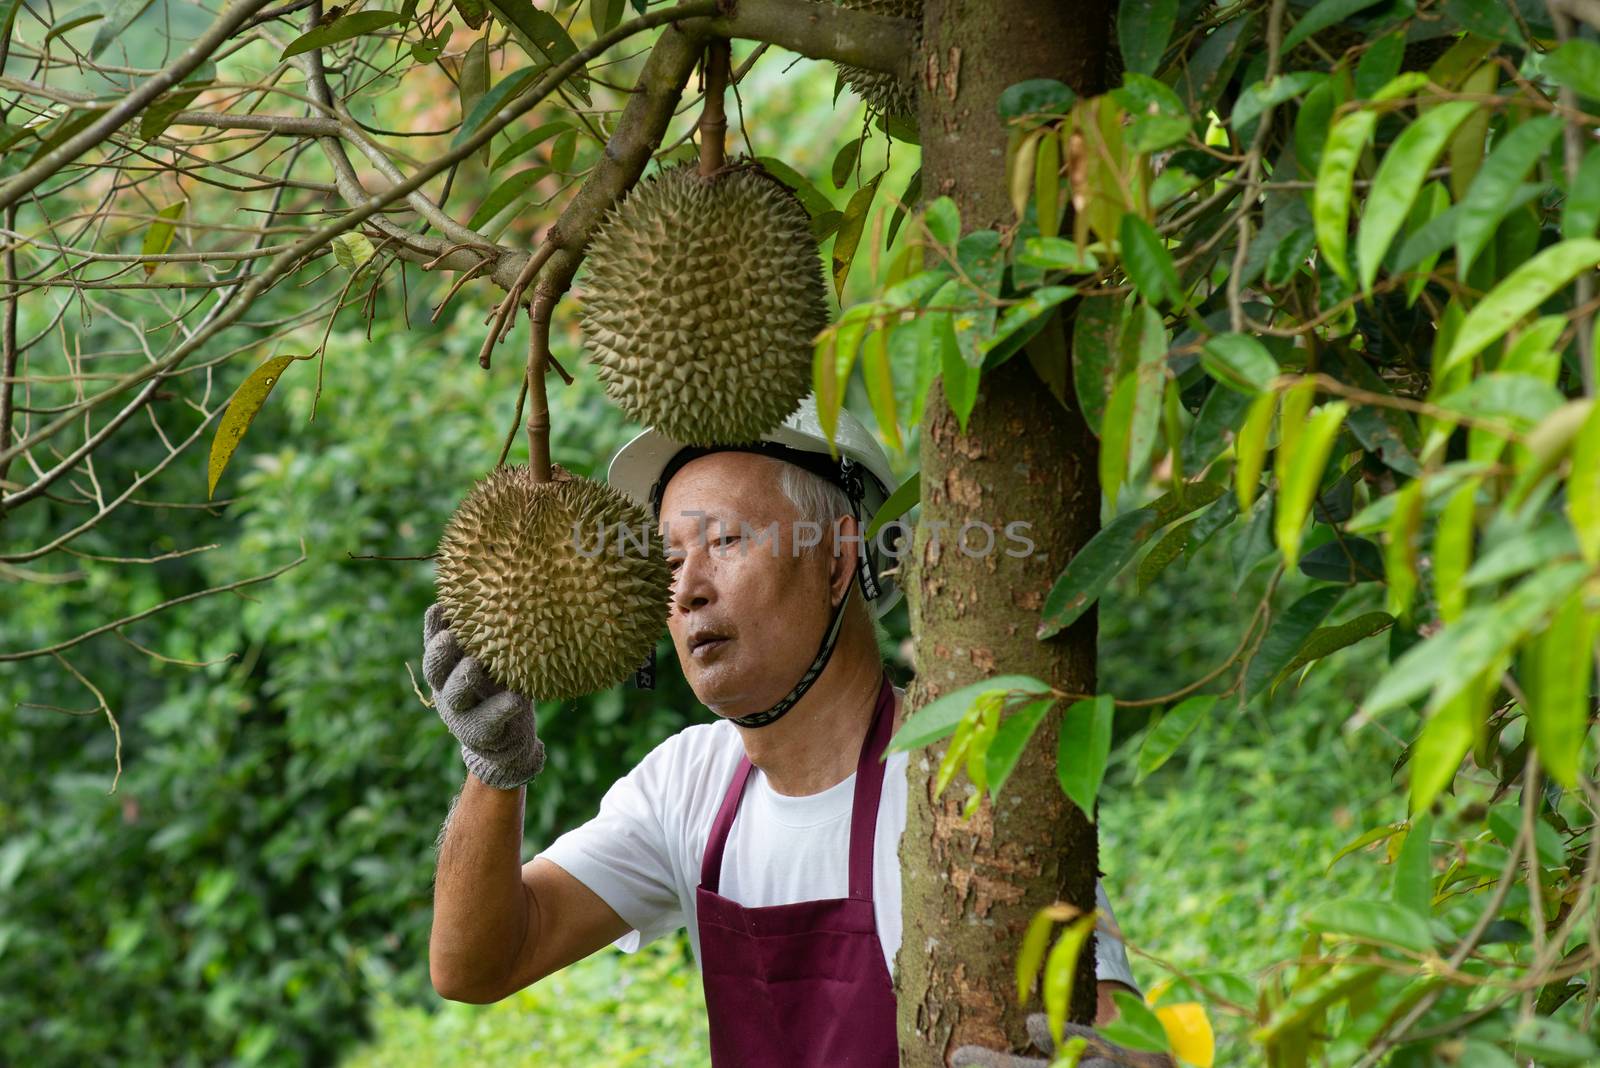 Farmer and Blackthorn durian tree in orchard.